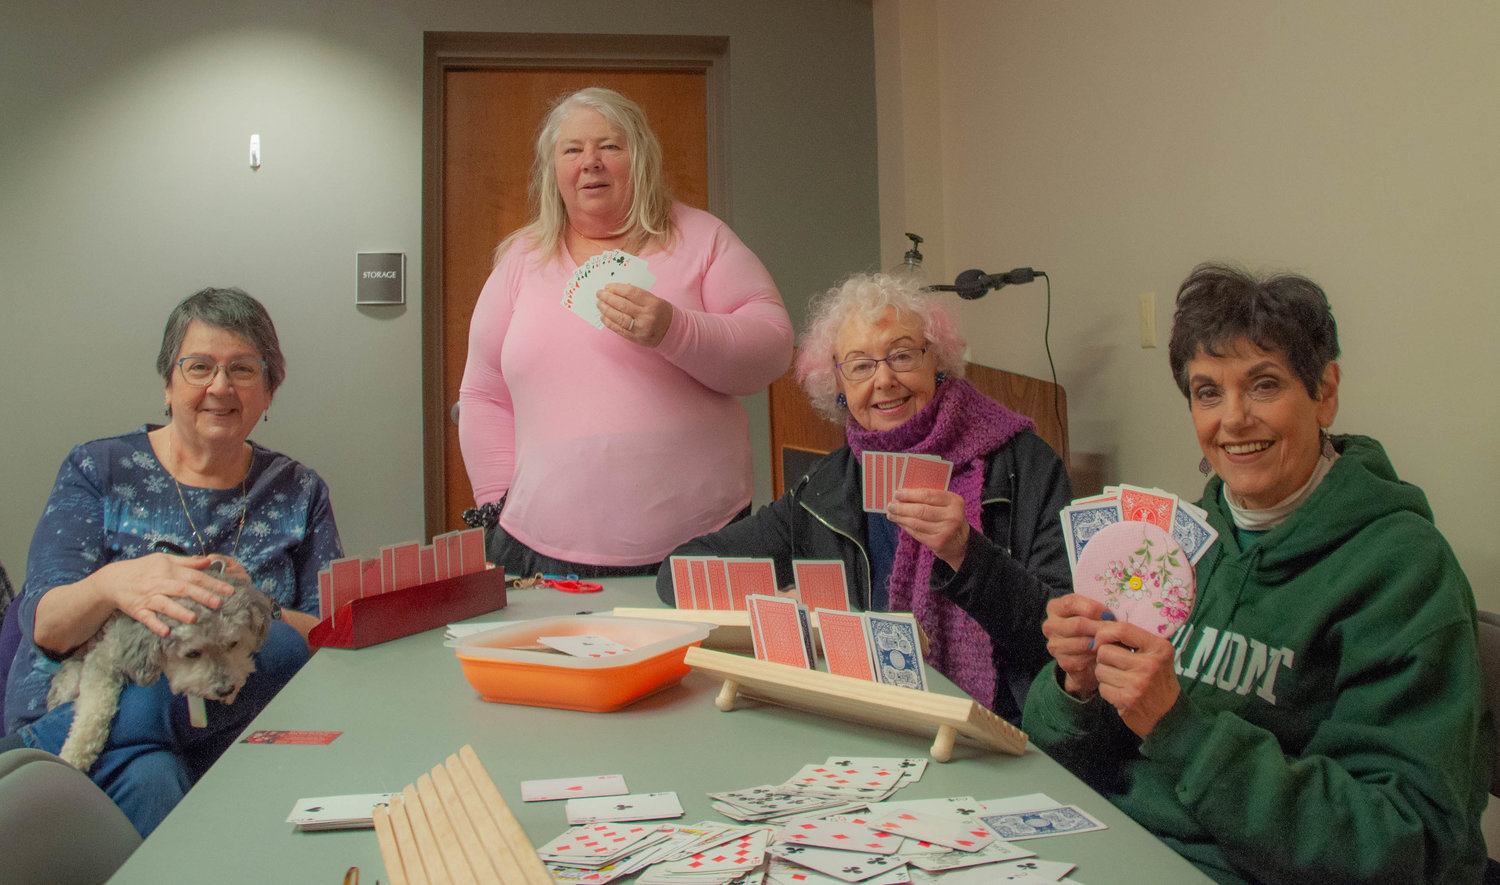 Joanne Rashell, left; Penny Reinlieb; Fran Greenfield; and Barbara Rudick were playing Samba, a variation of Canasta, at the Ethelbert B. Crawford Library in Monticello, NY last Friday.